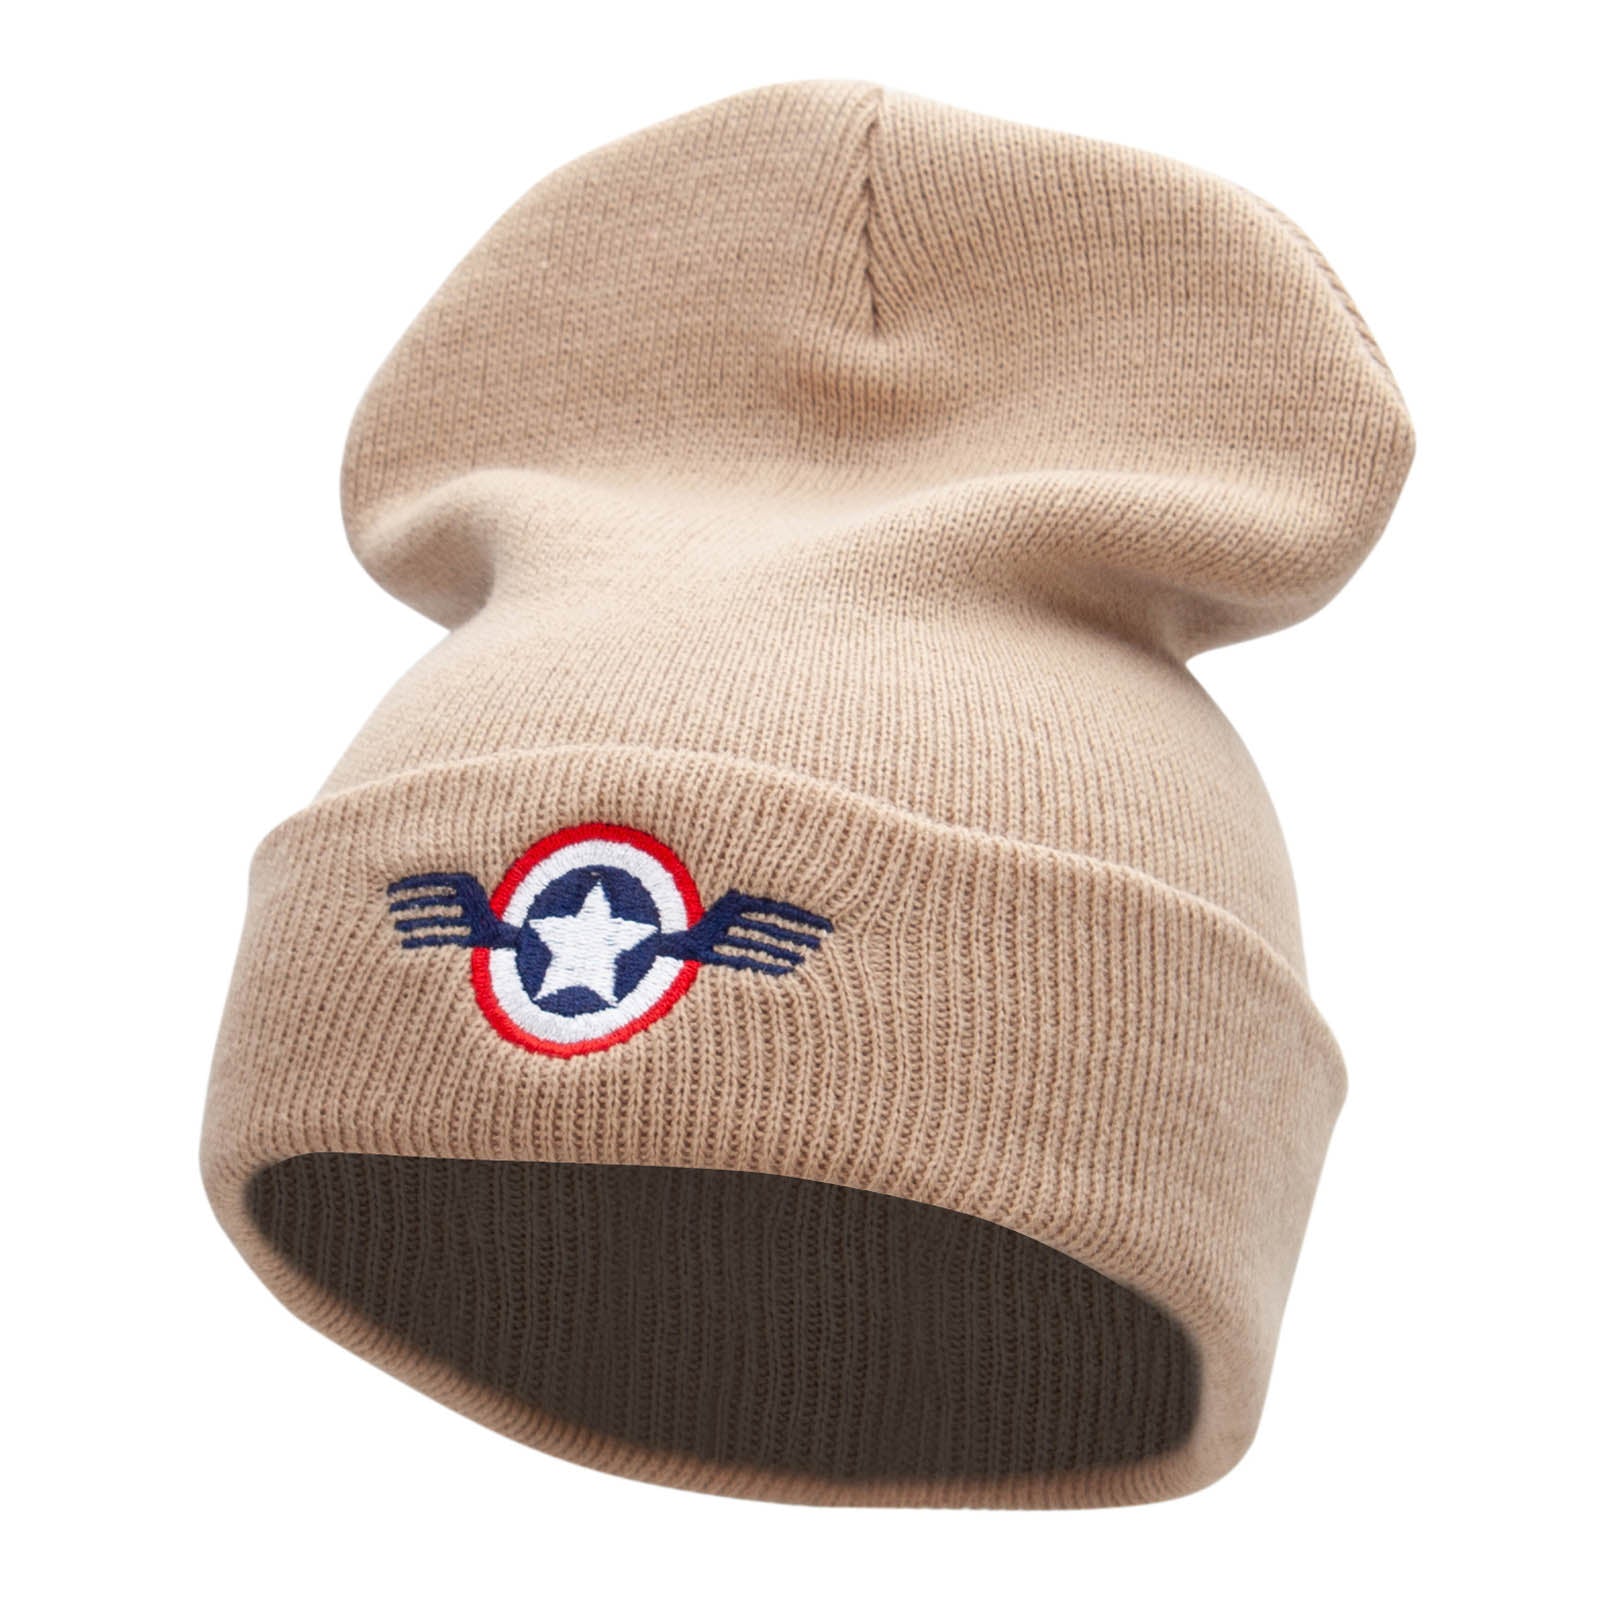 Flying USA Seal Embroidered 12 Inch Solid Long Beanie Made in USA - Khaki OSFM